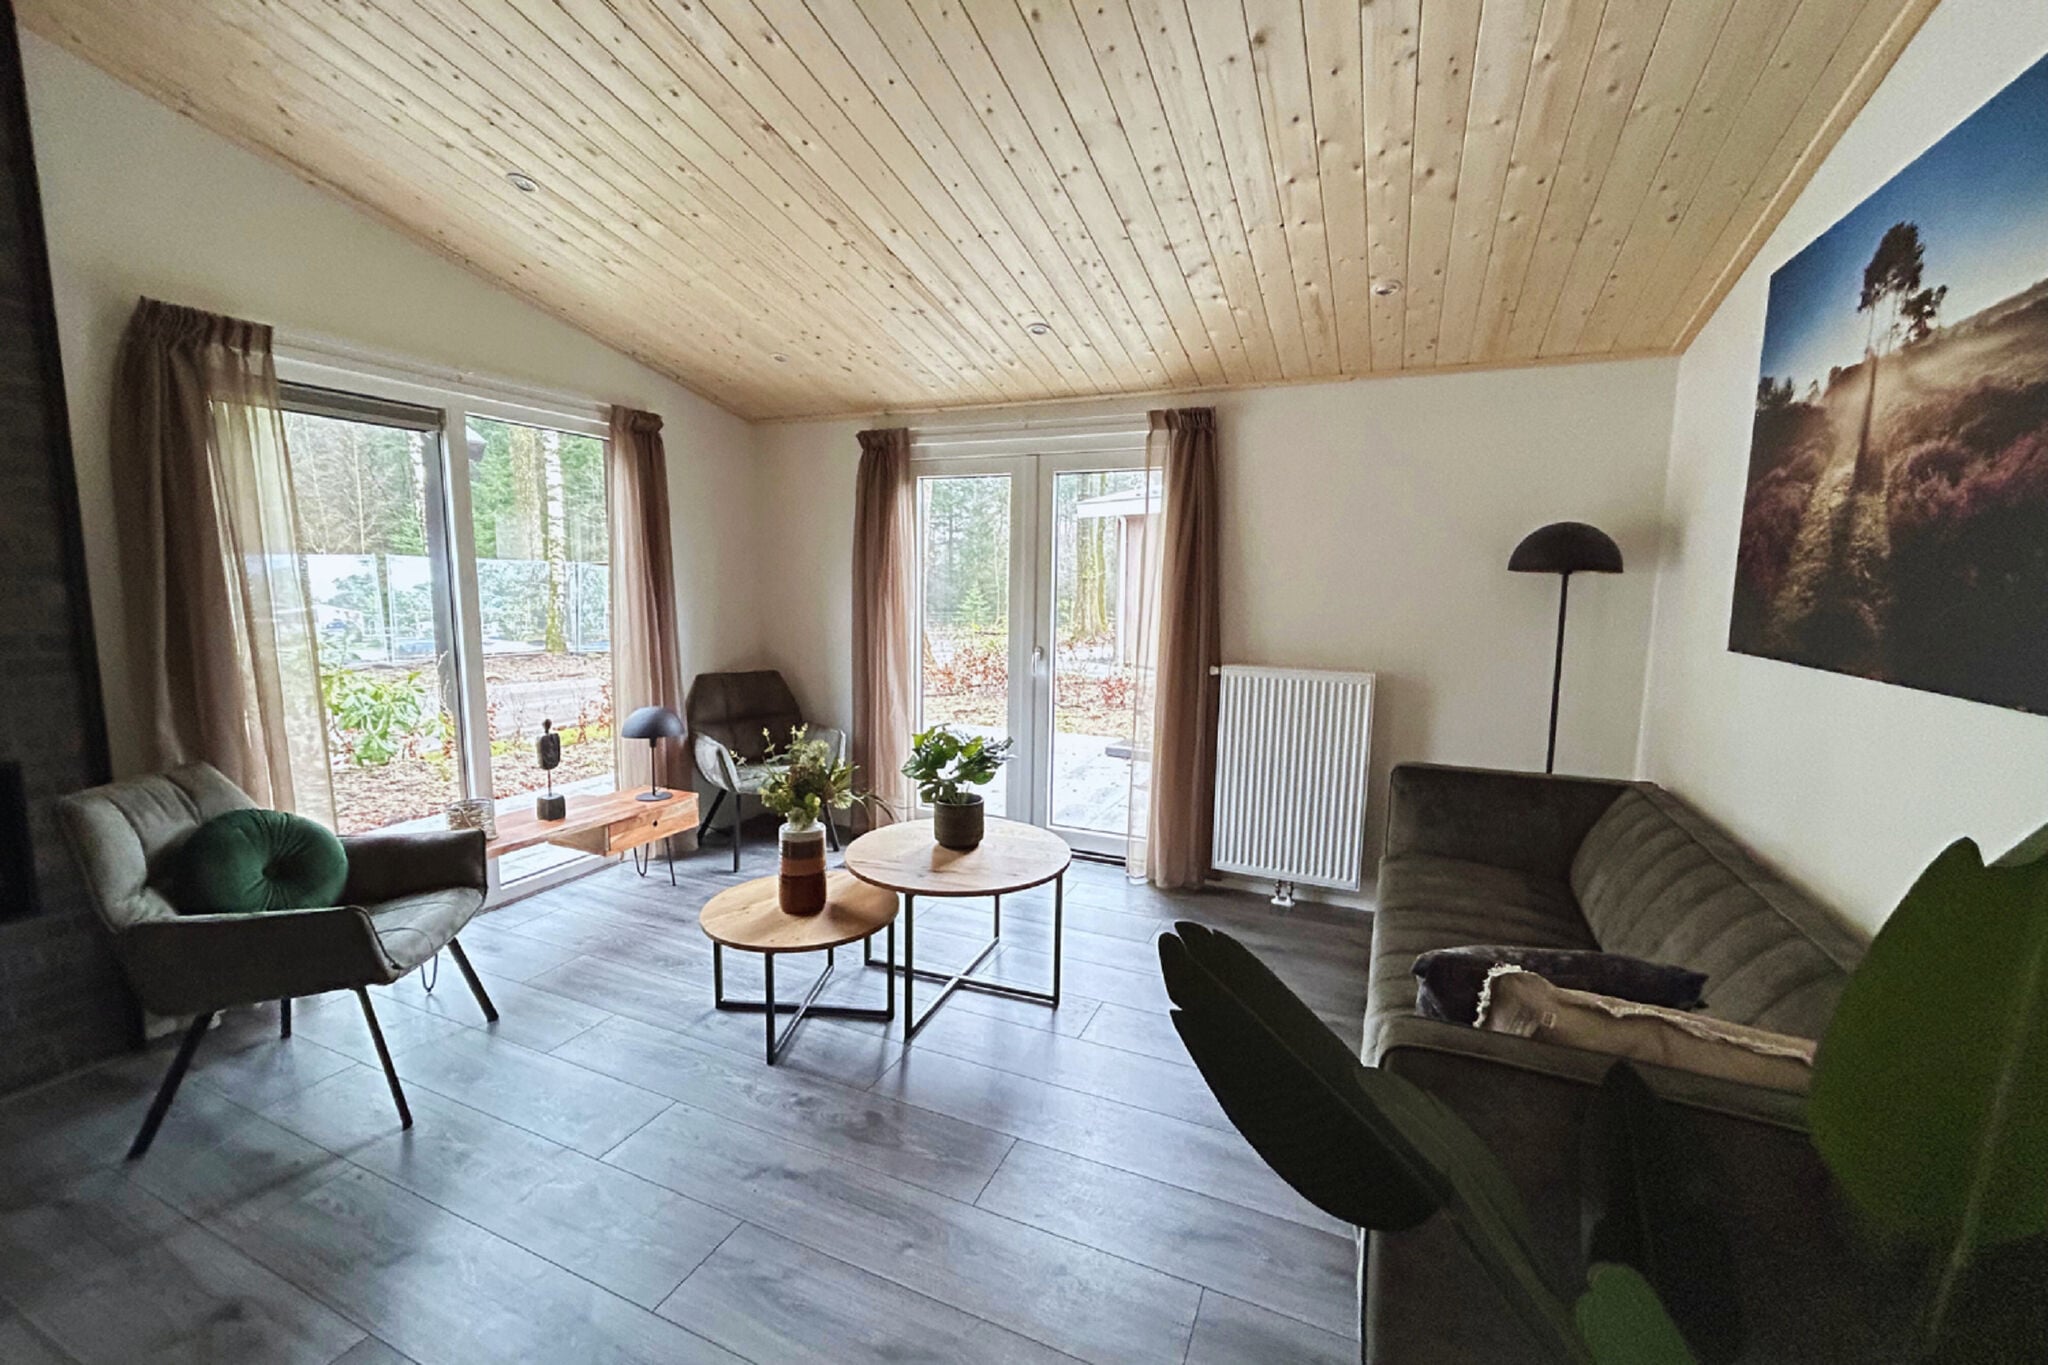 Nice chalet with a wooded location on the Veluwe